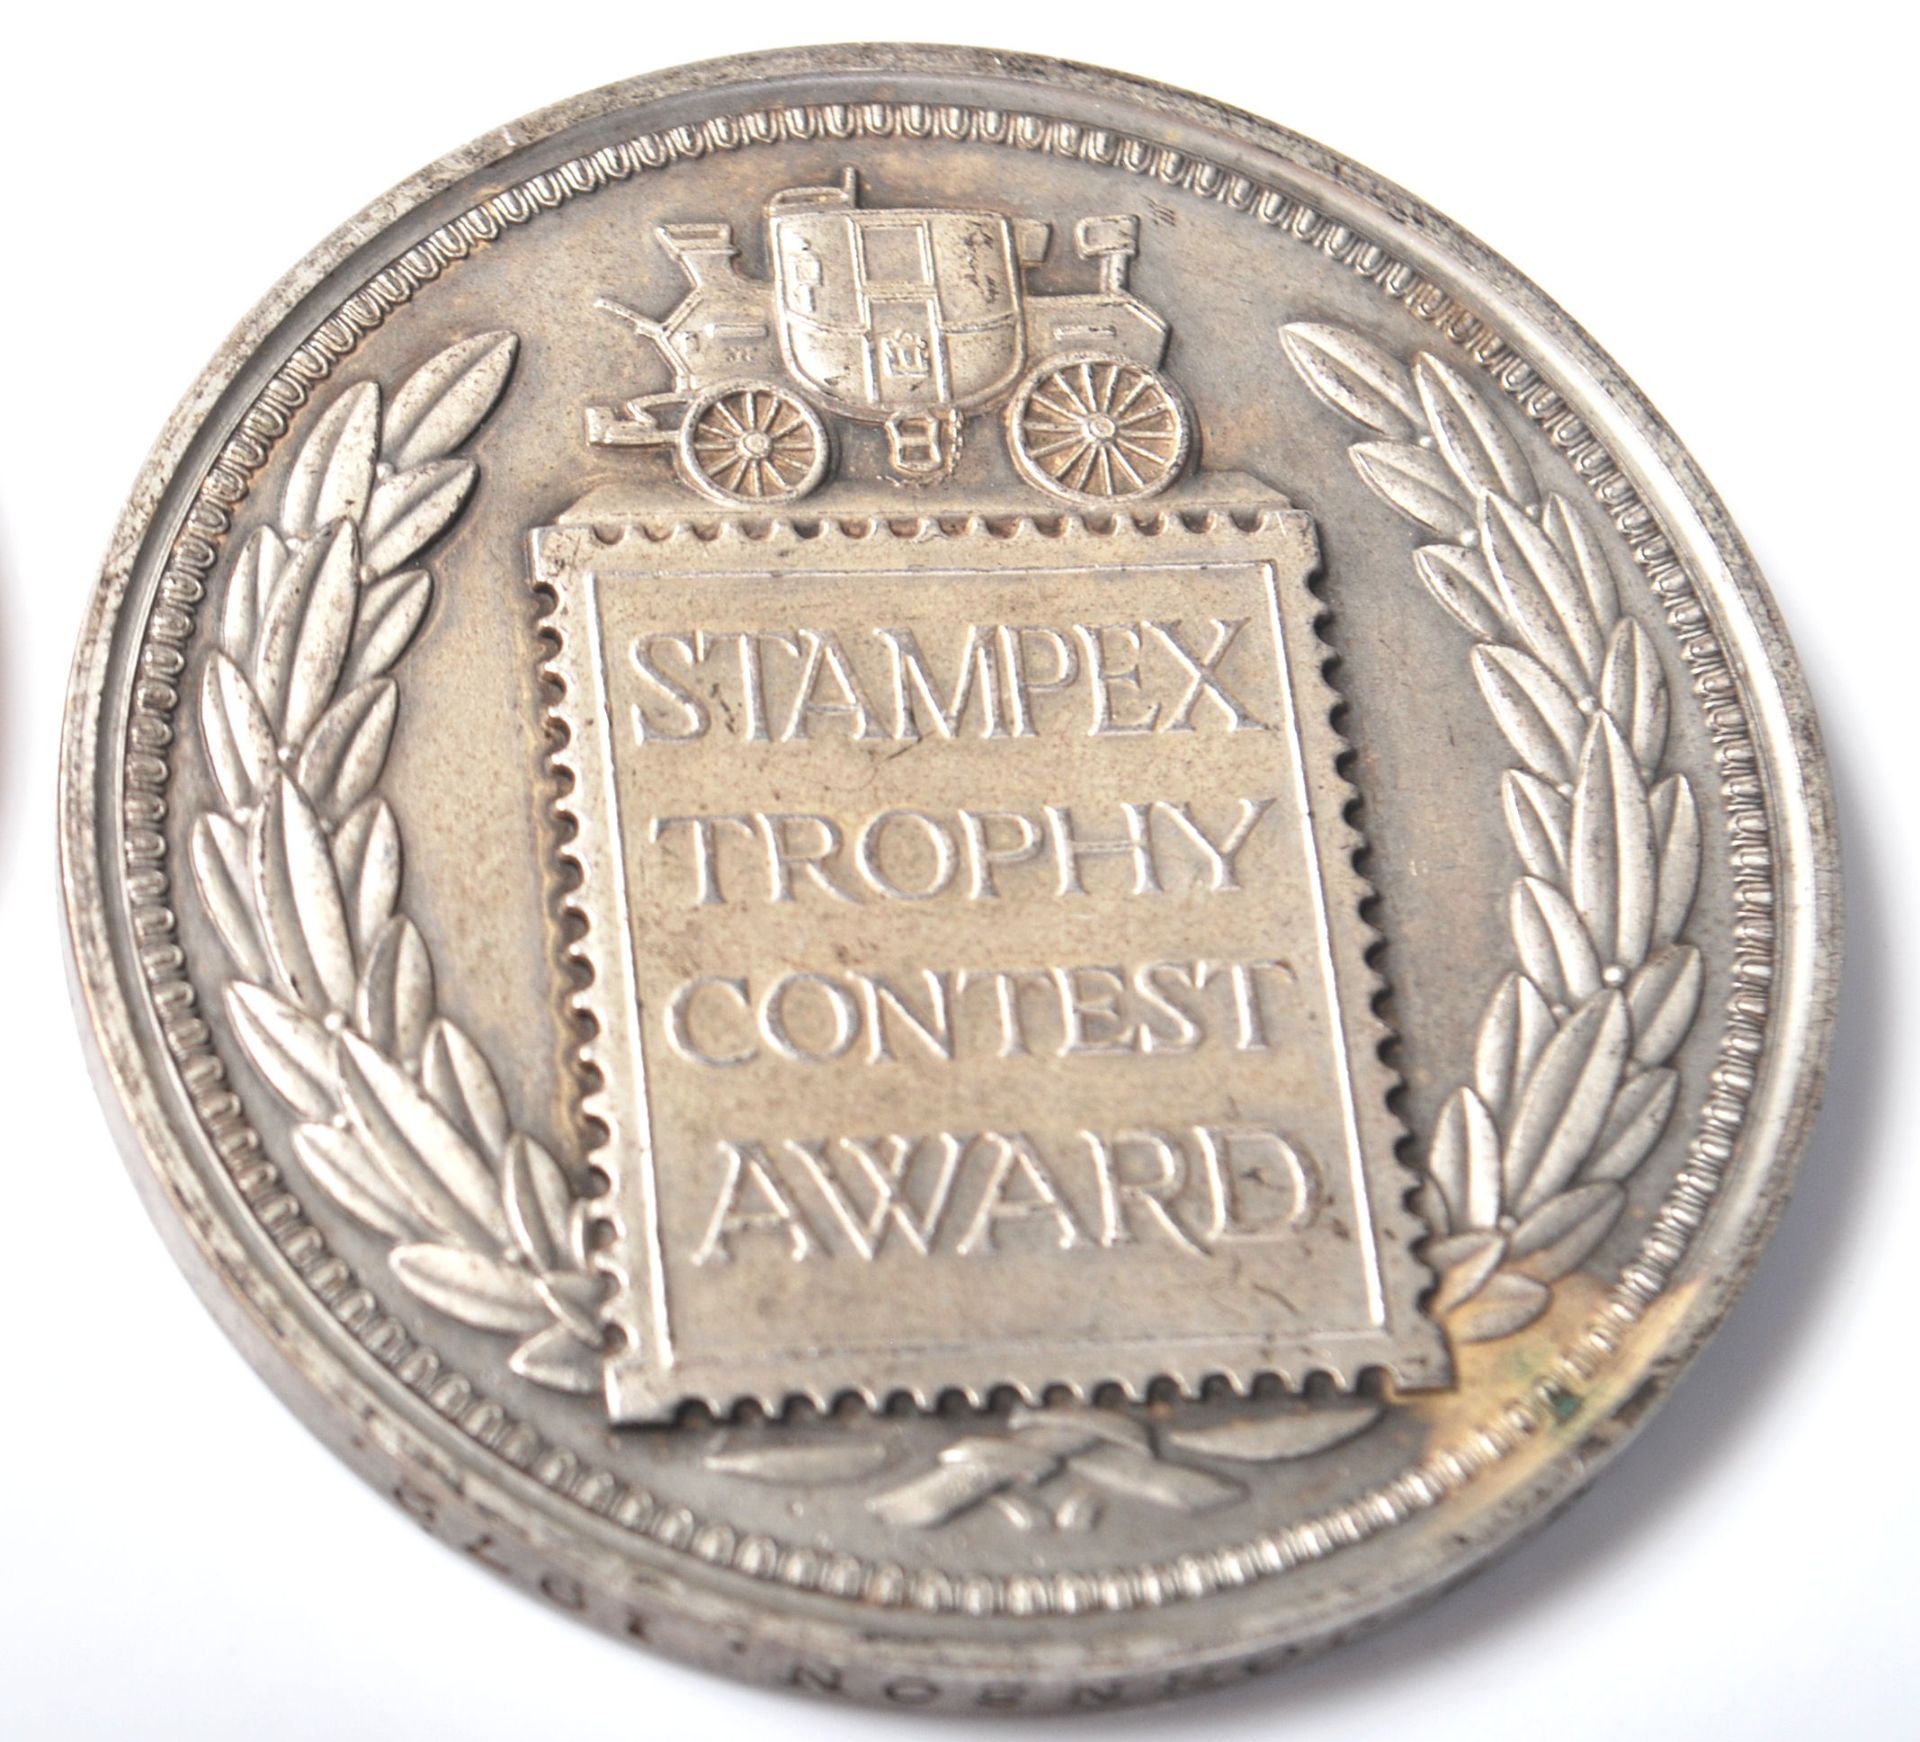 TWO 20TH CENTURY WITHE METAL MEDALS FOR STAMPEX TROPHY CONTEST AWARD - Bild 3 aus 6